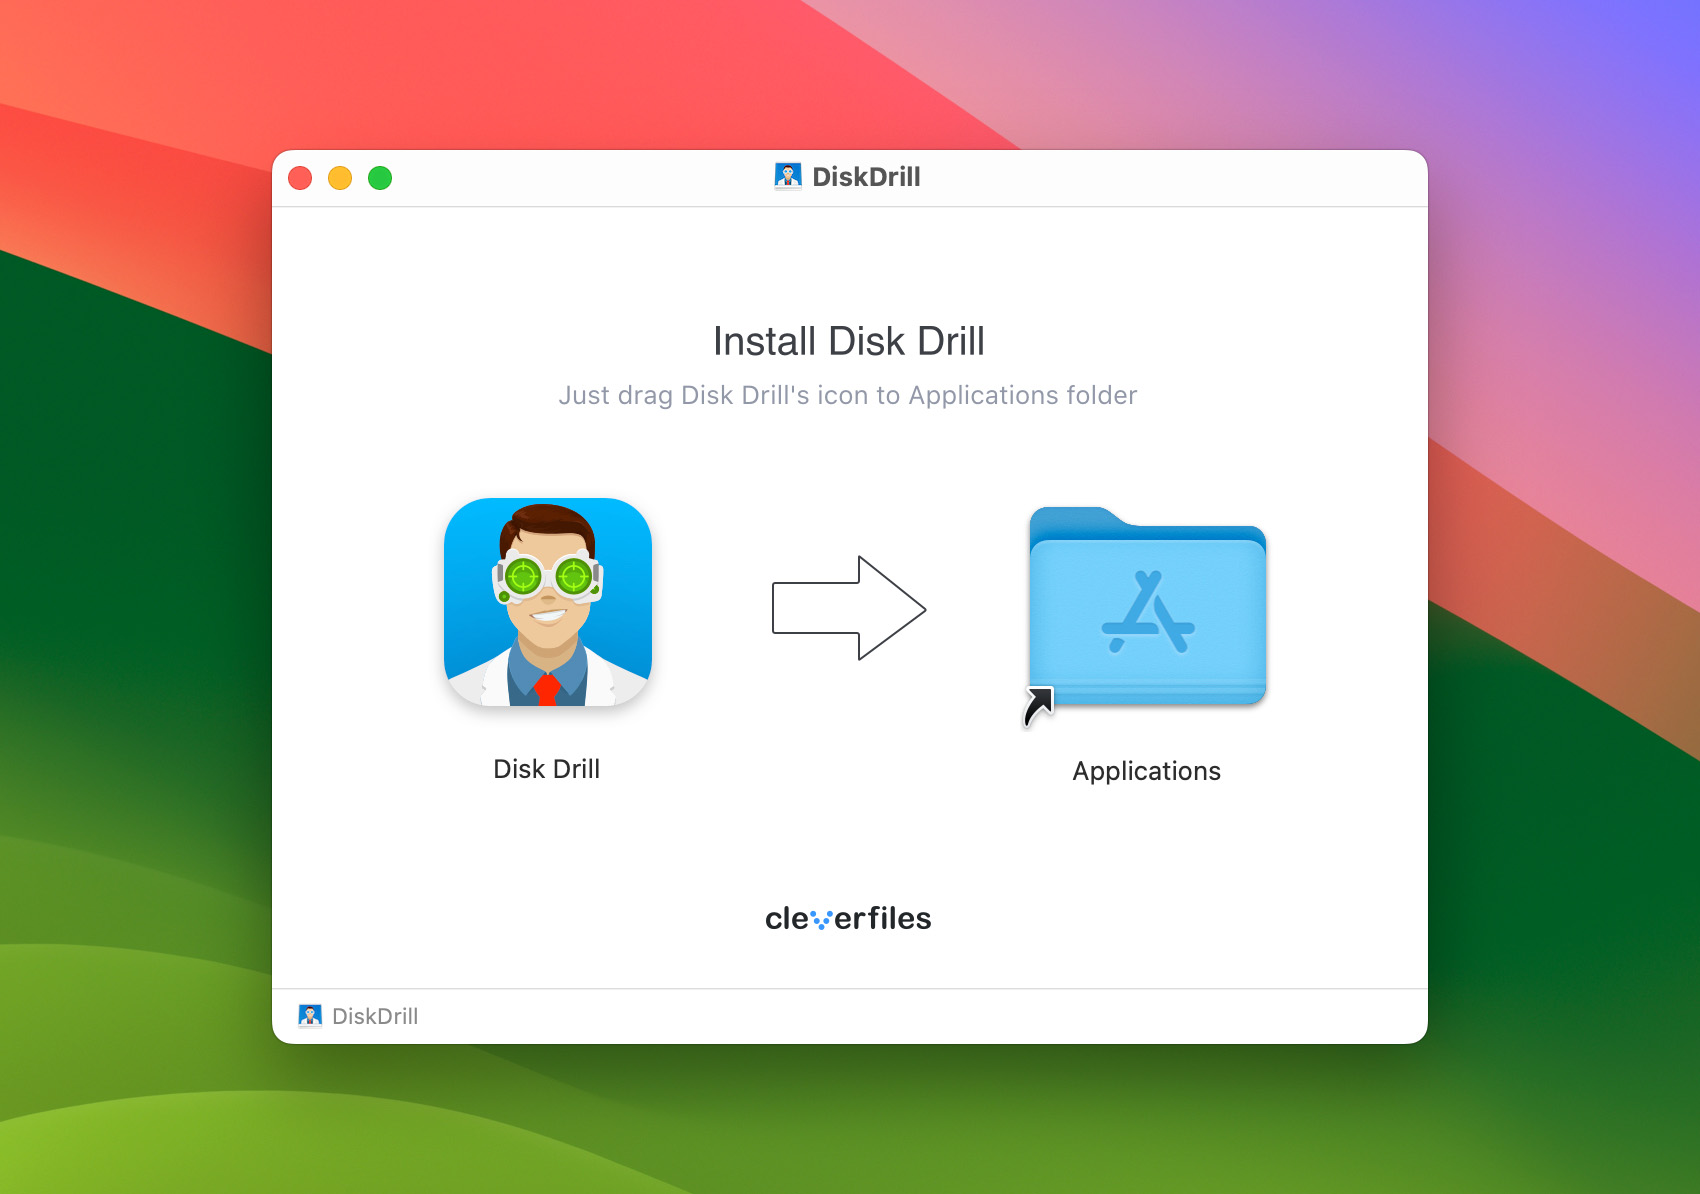 Install disk drill for macOS Sonoma